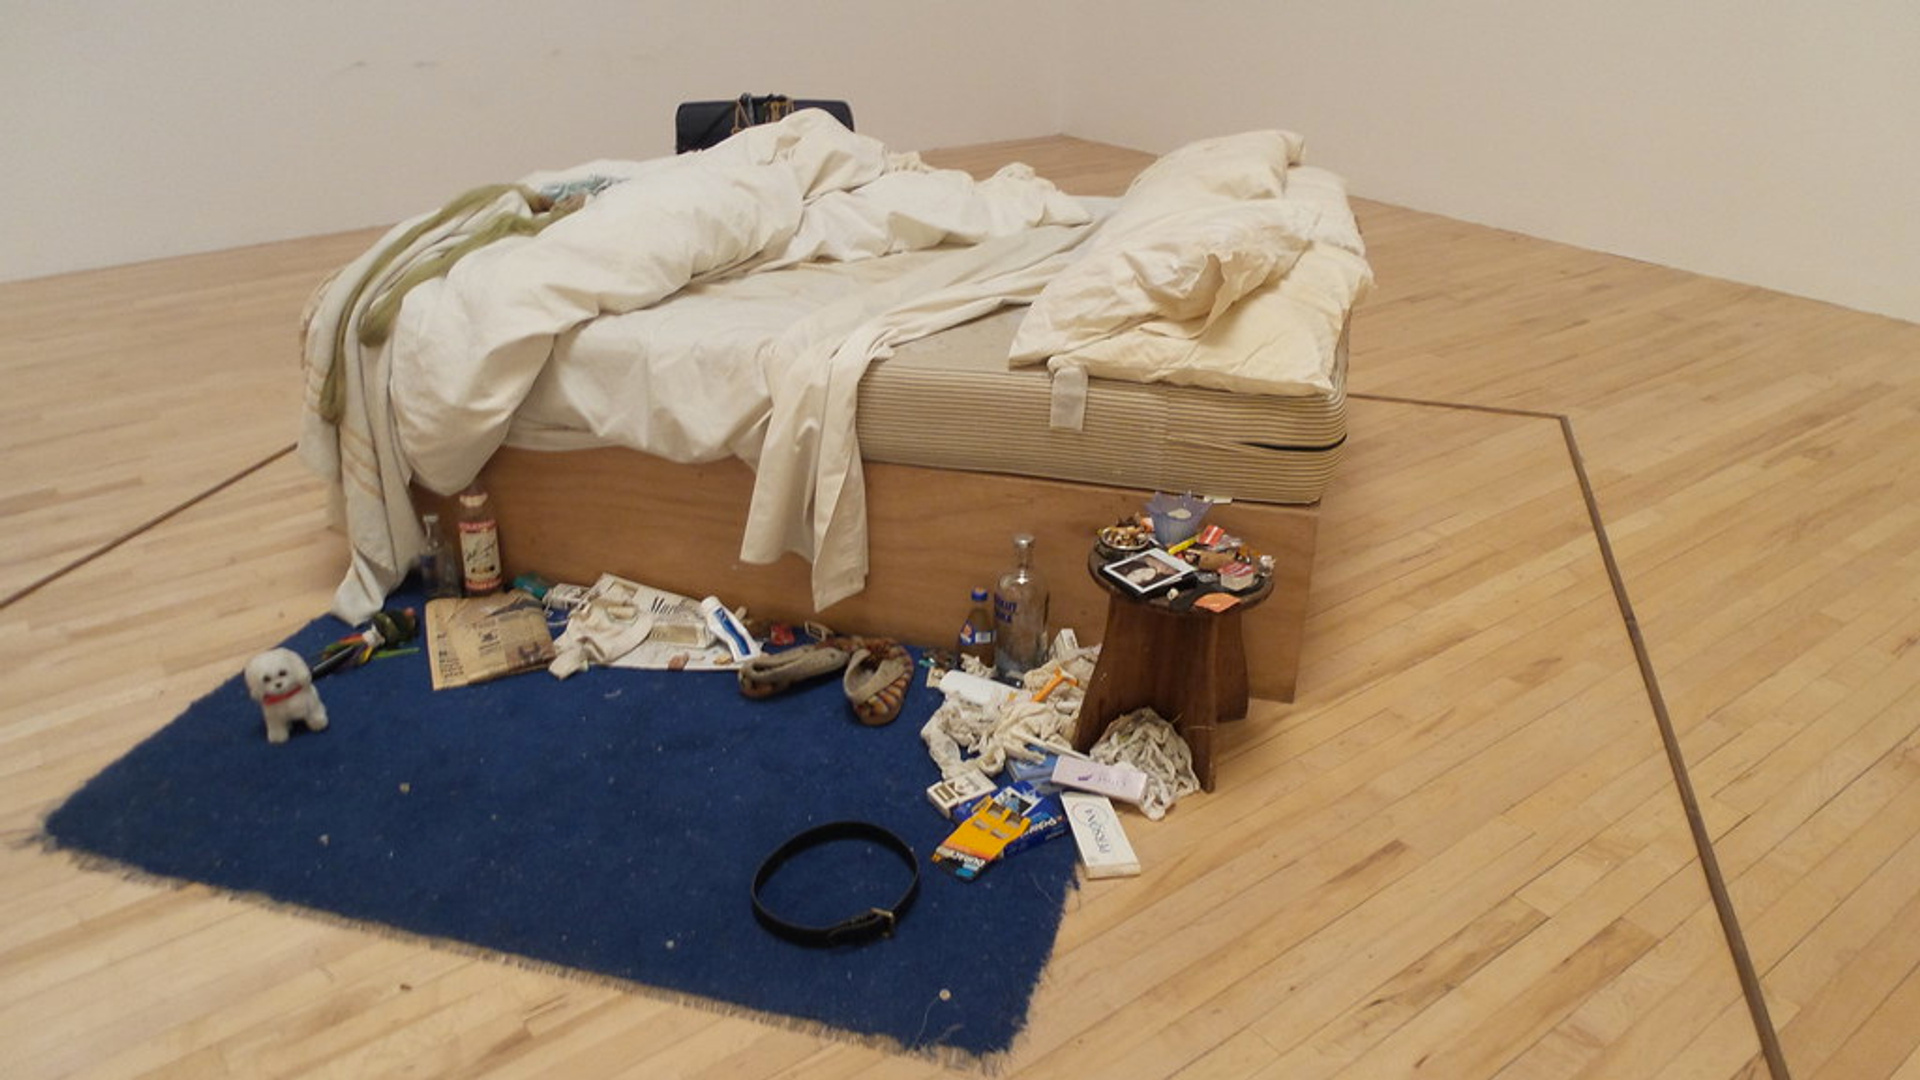 An image of Emin's bed, unmade and surrounded by debris including a bottle of vodka, such as condoms, underwear with menstrual blood stains, and functional objects, including a pair of slippers.